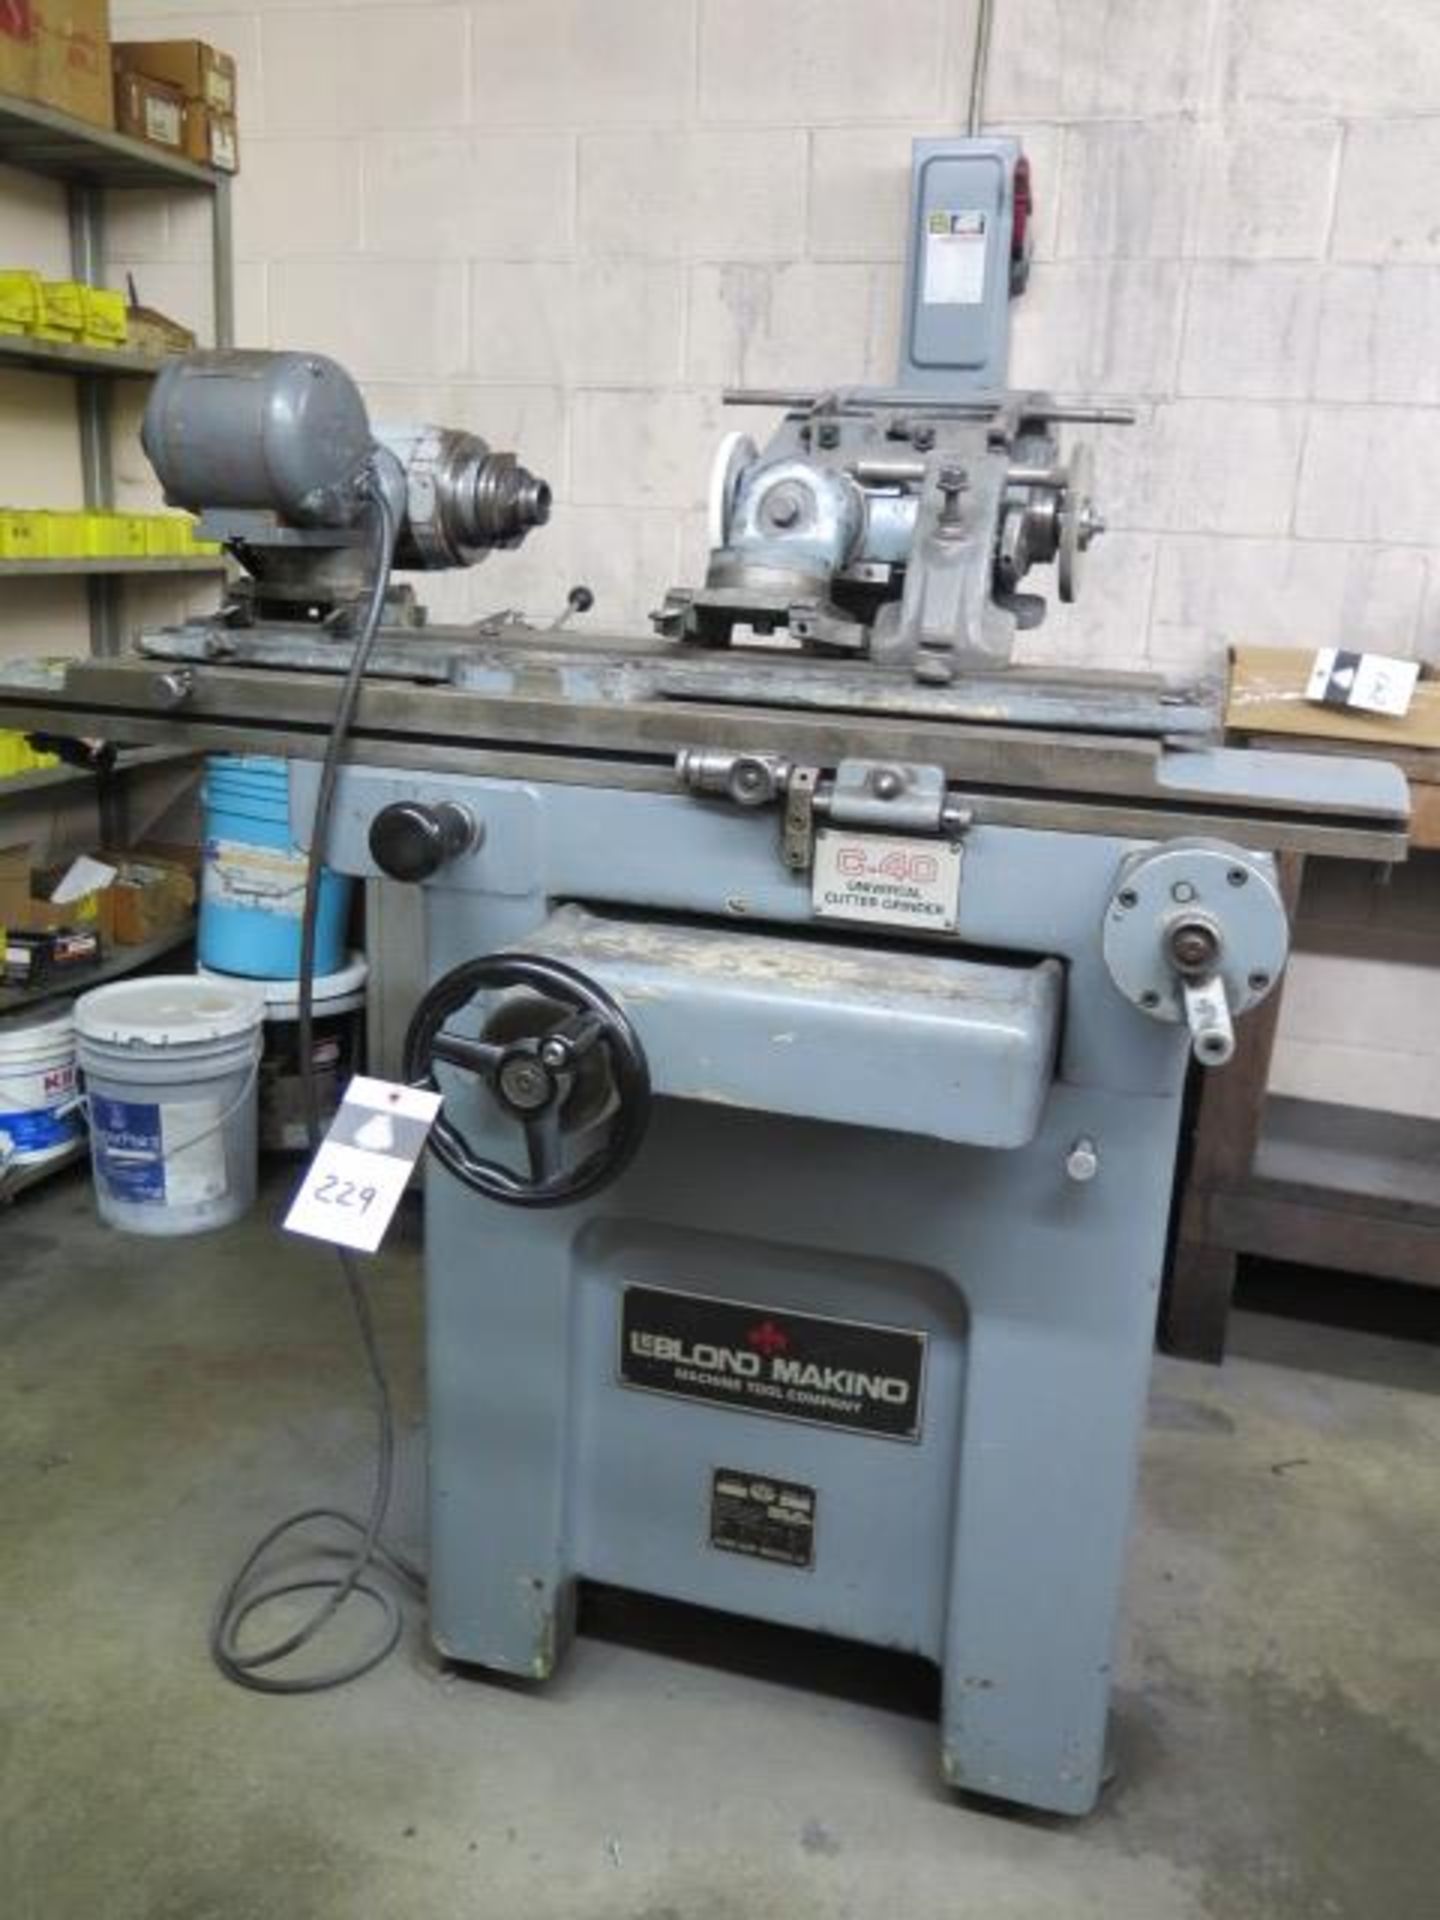 LeBlond Makino C-40 Universal Tool &Cutter Grinder s/n 81-0027 w/ Compound Grinding Head, SOLD AS IS